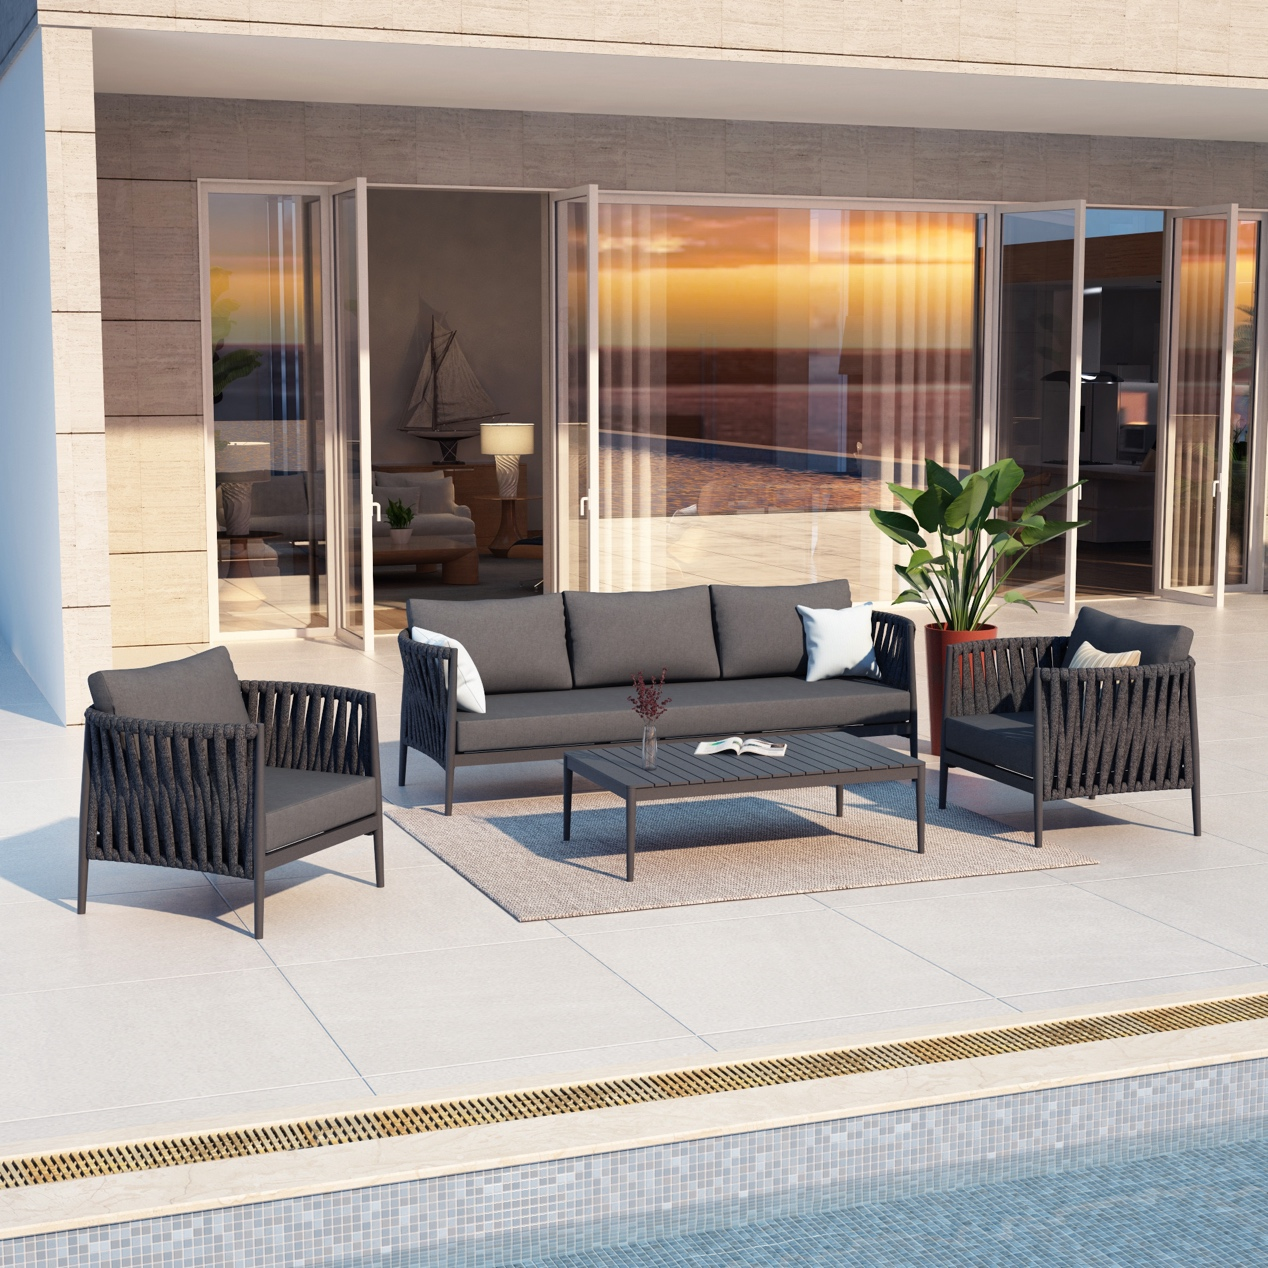 The Best Patio Furniture on Sale at Baeryon's Summer Sale